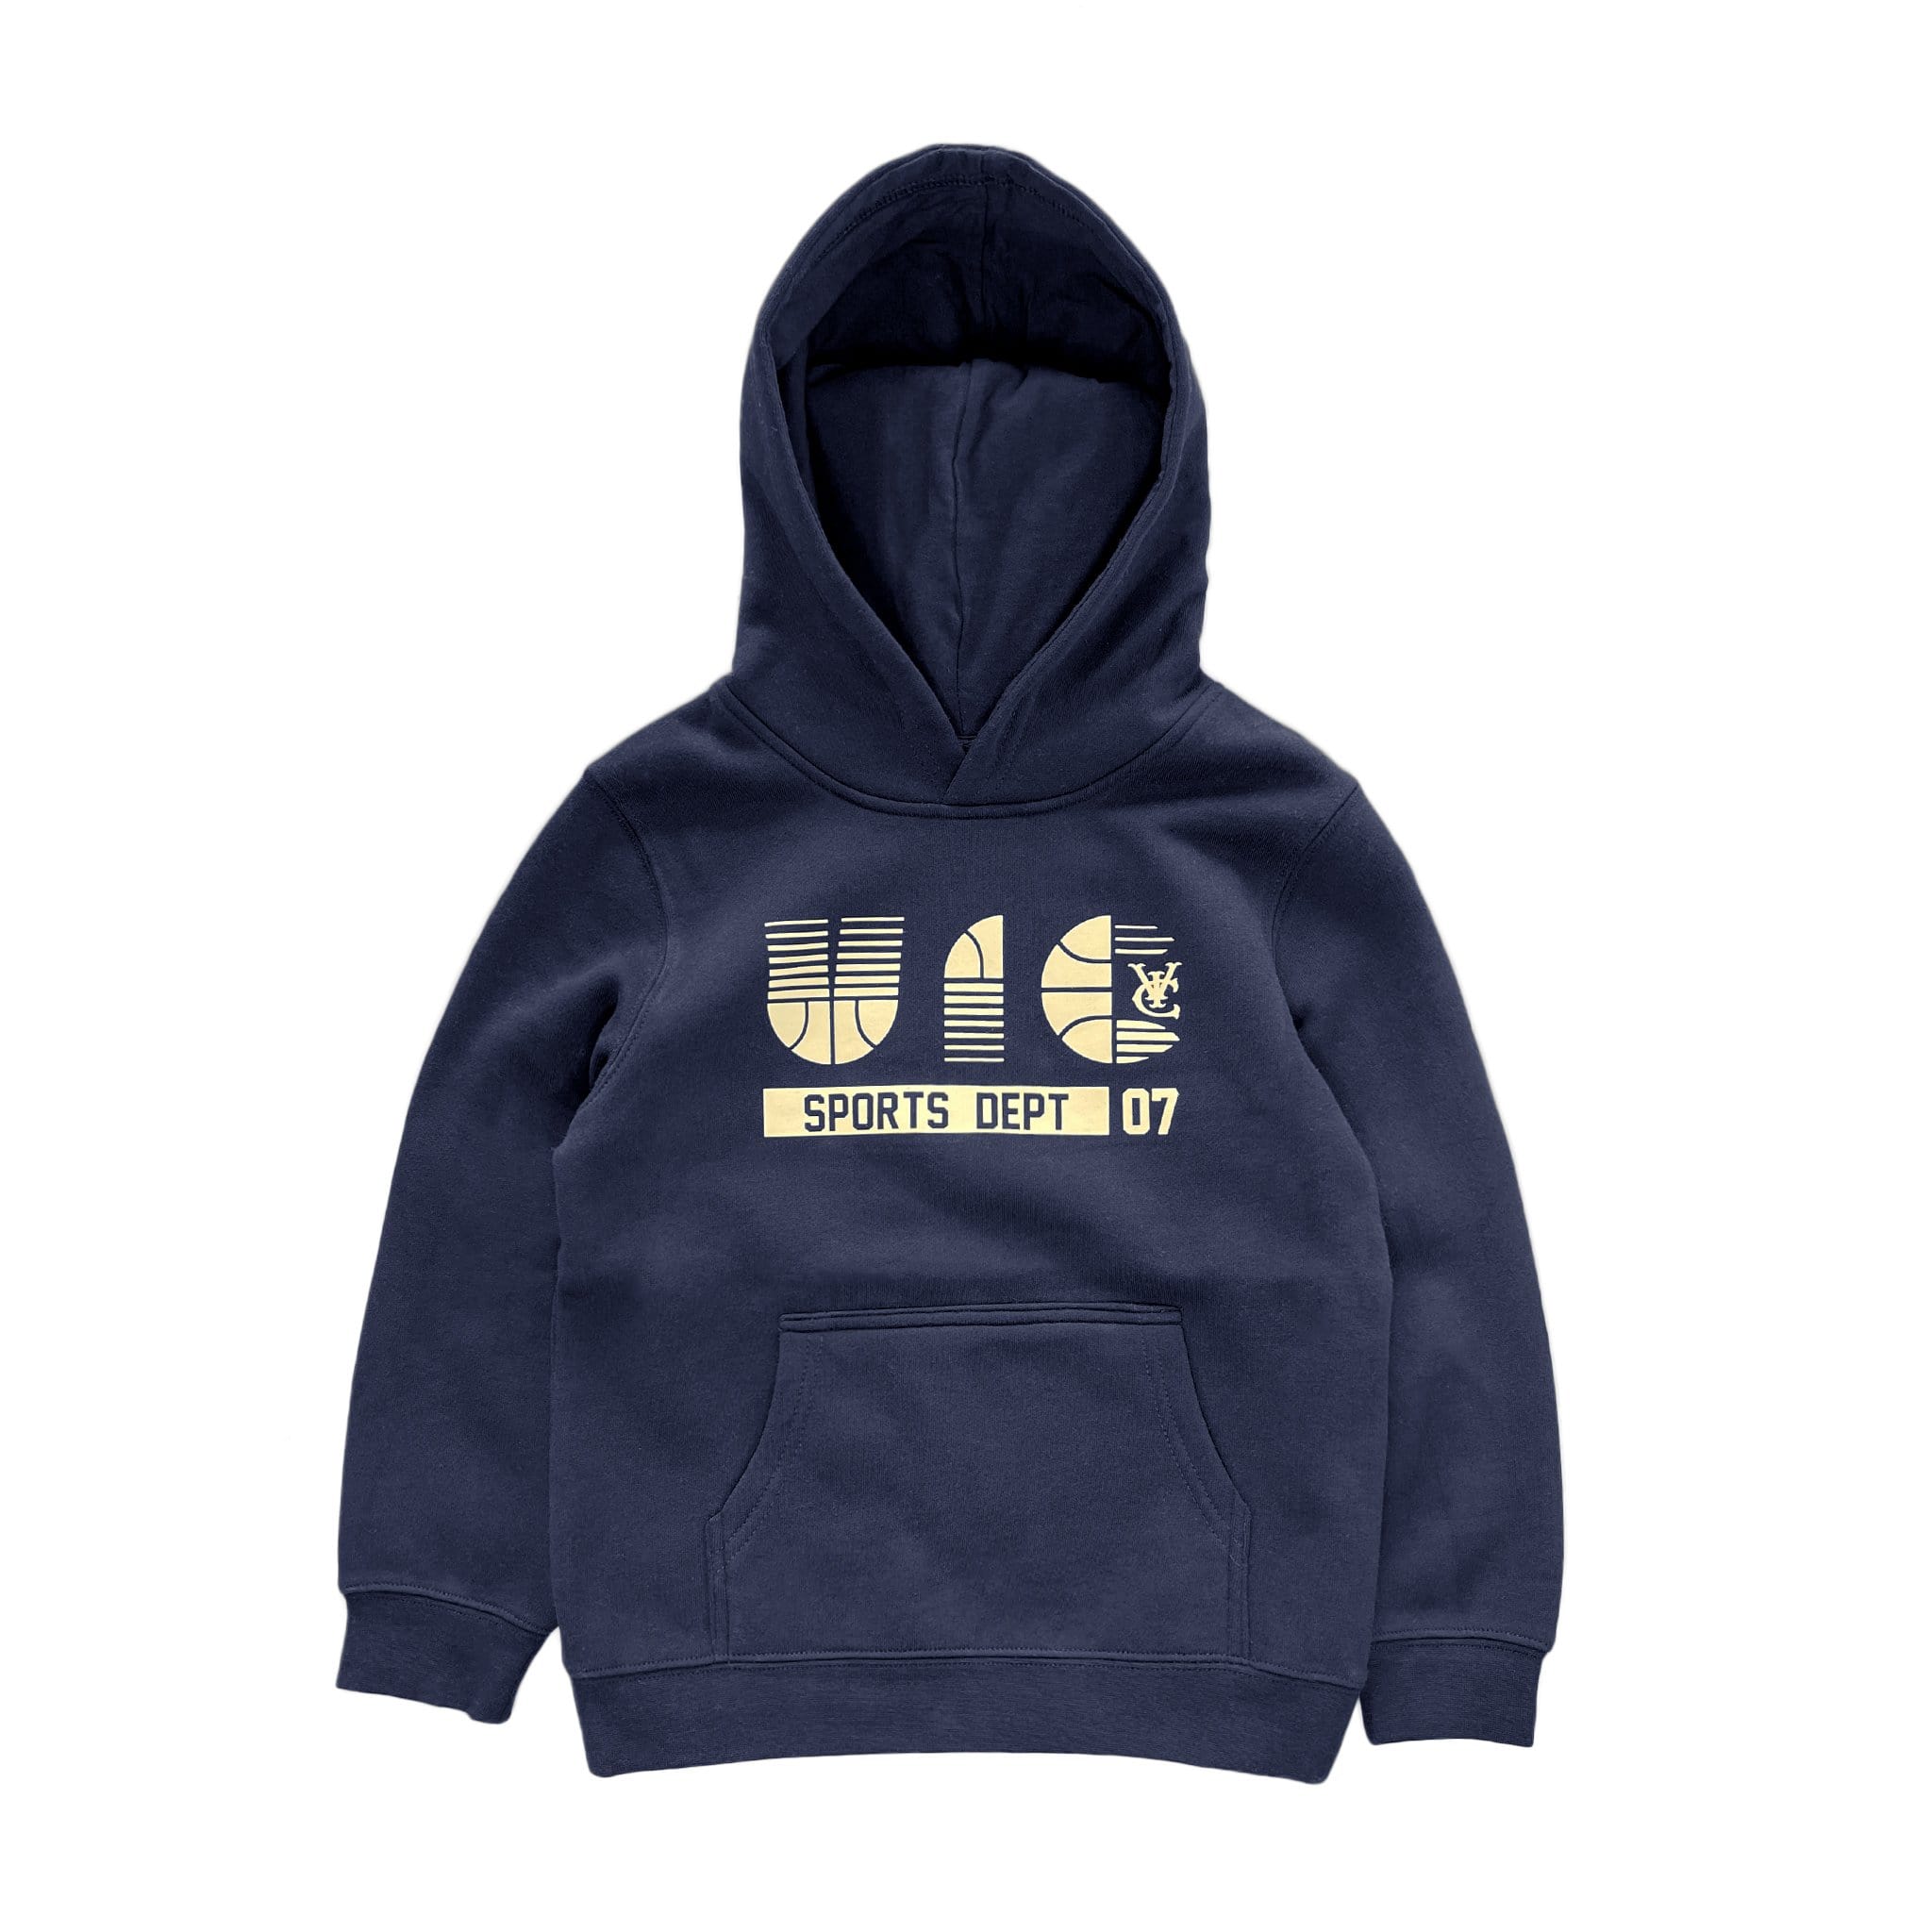 Premium quality youth hoodie sweatshirt by New Zealand skate and streetwear clothing label VIC Apparel. Logo screenprint on front. Regular fit, Mid-weight, 290 GSM, 100% Cotton.